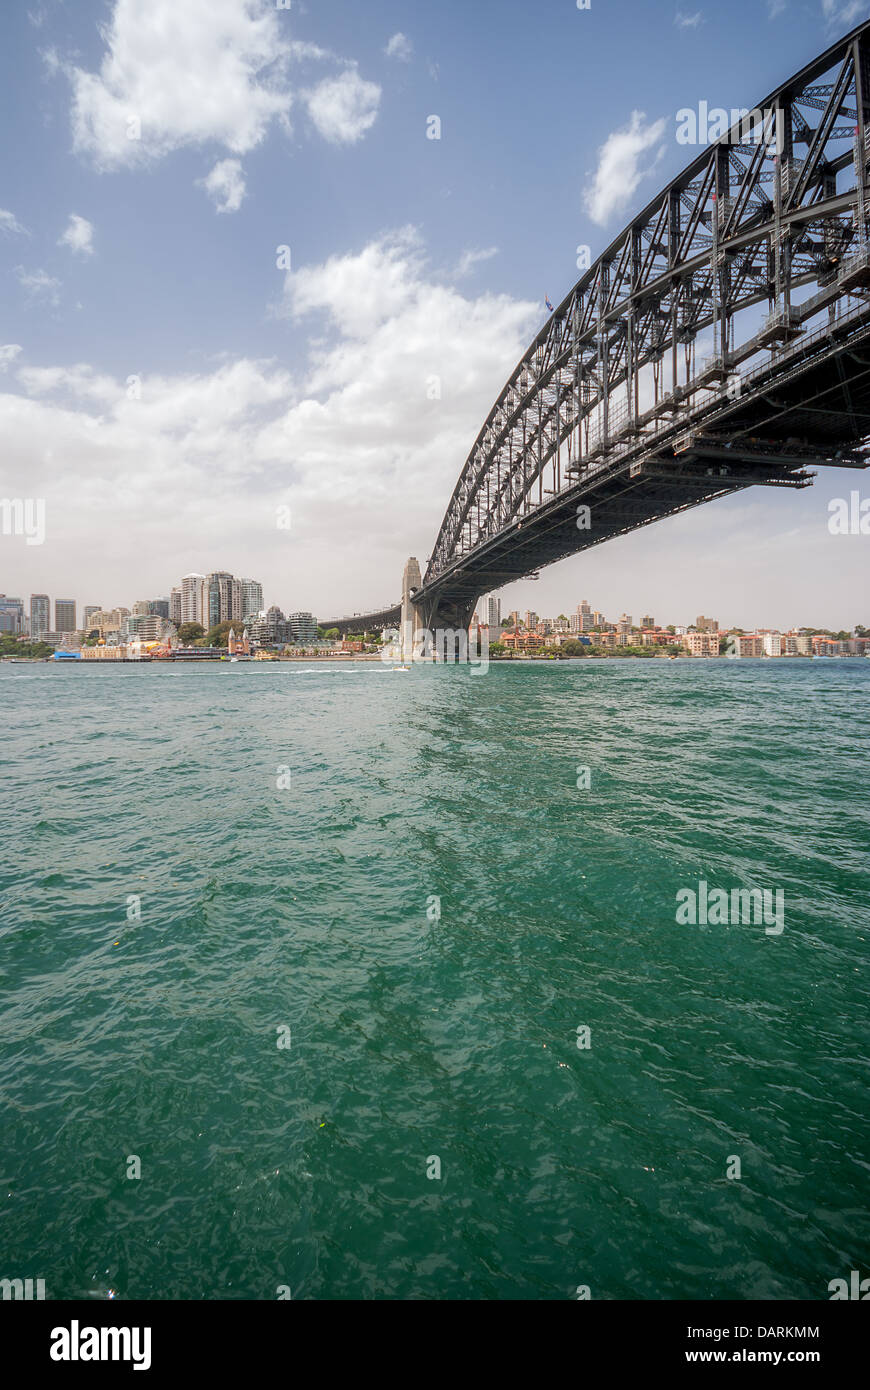 The iconic Sydney Harbour Bridge which spans from downtown to North Sydney. Stock Photo